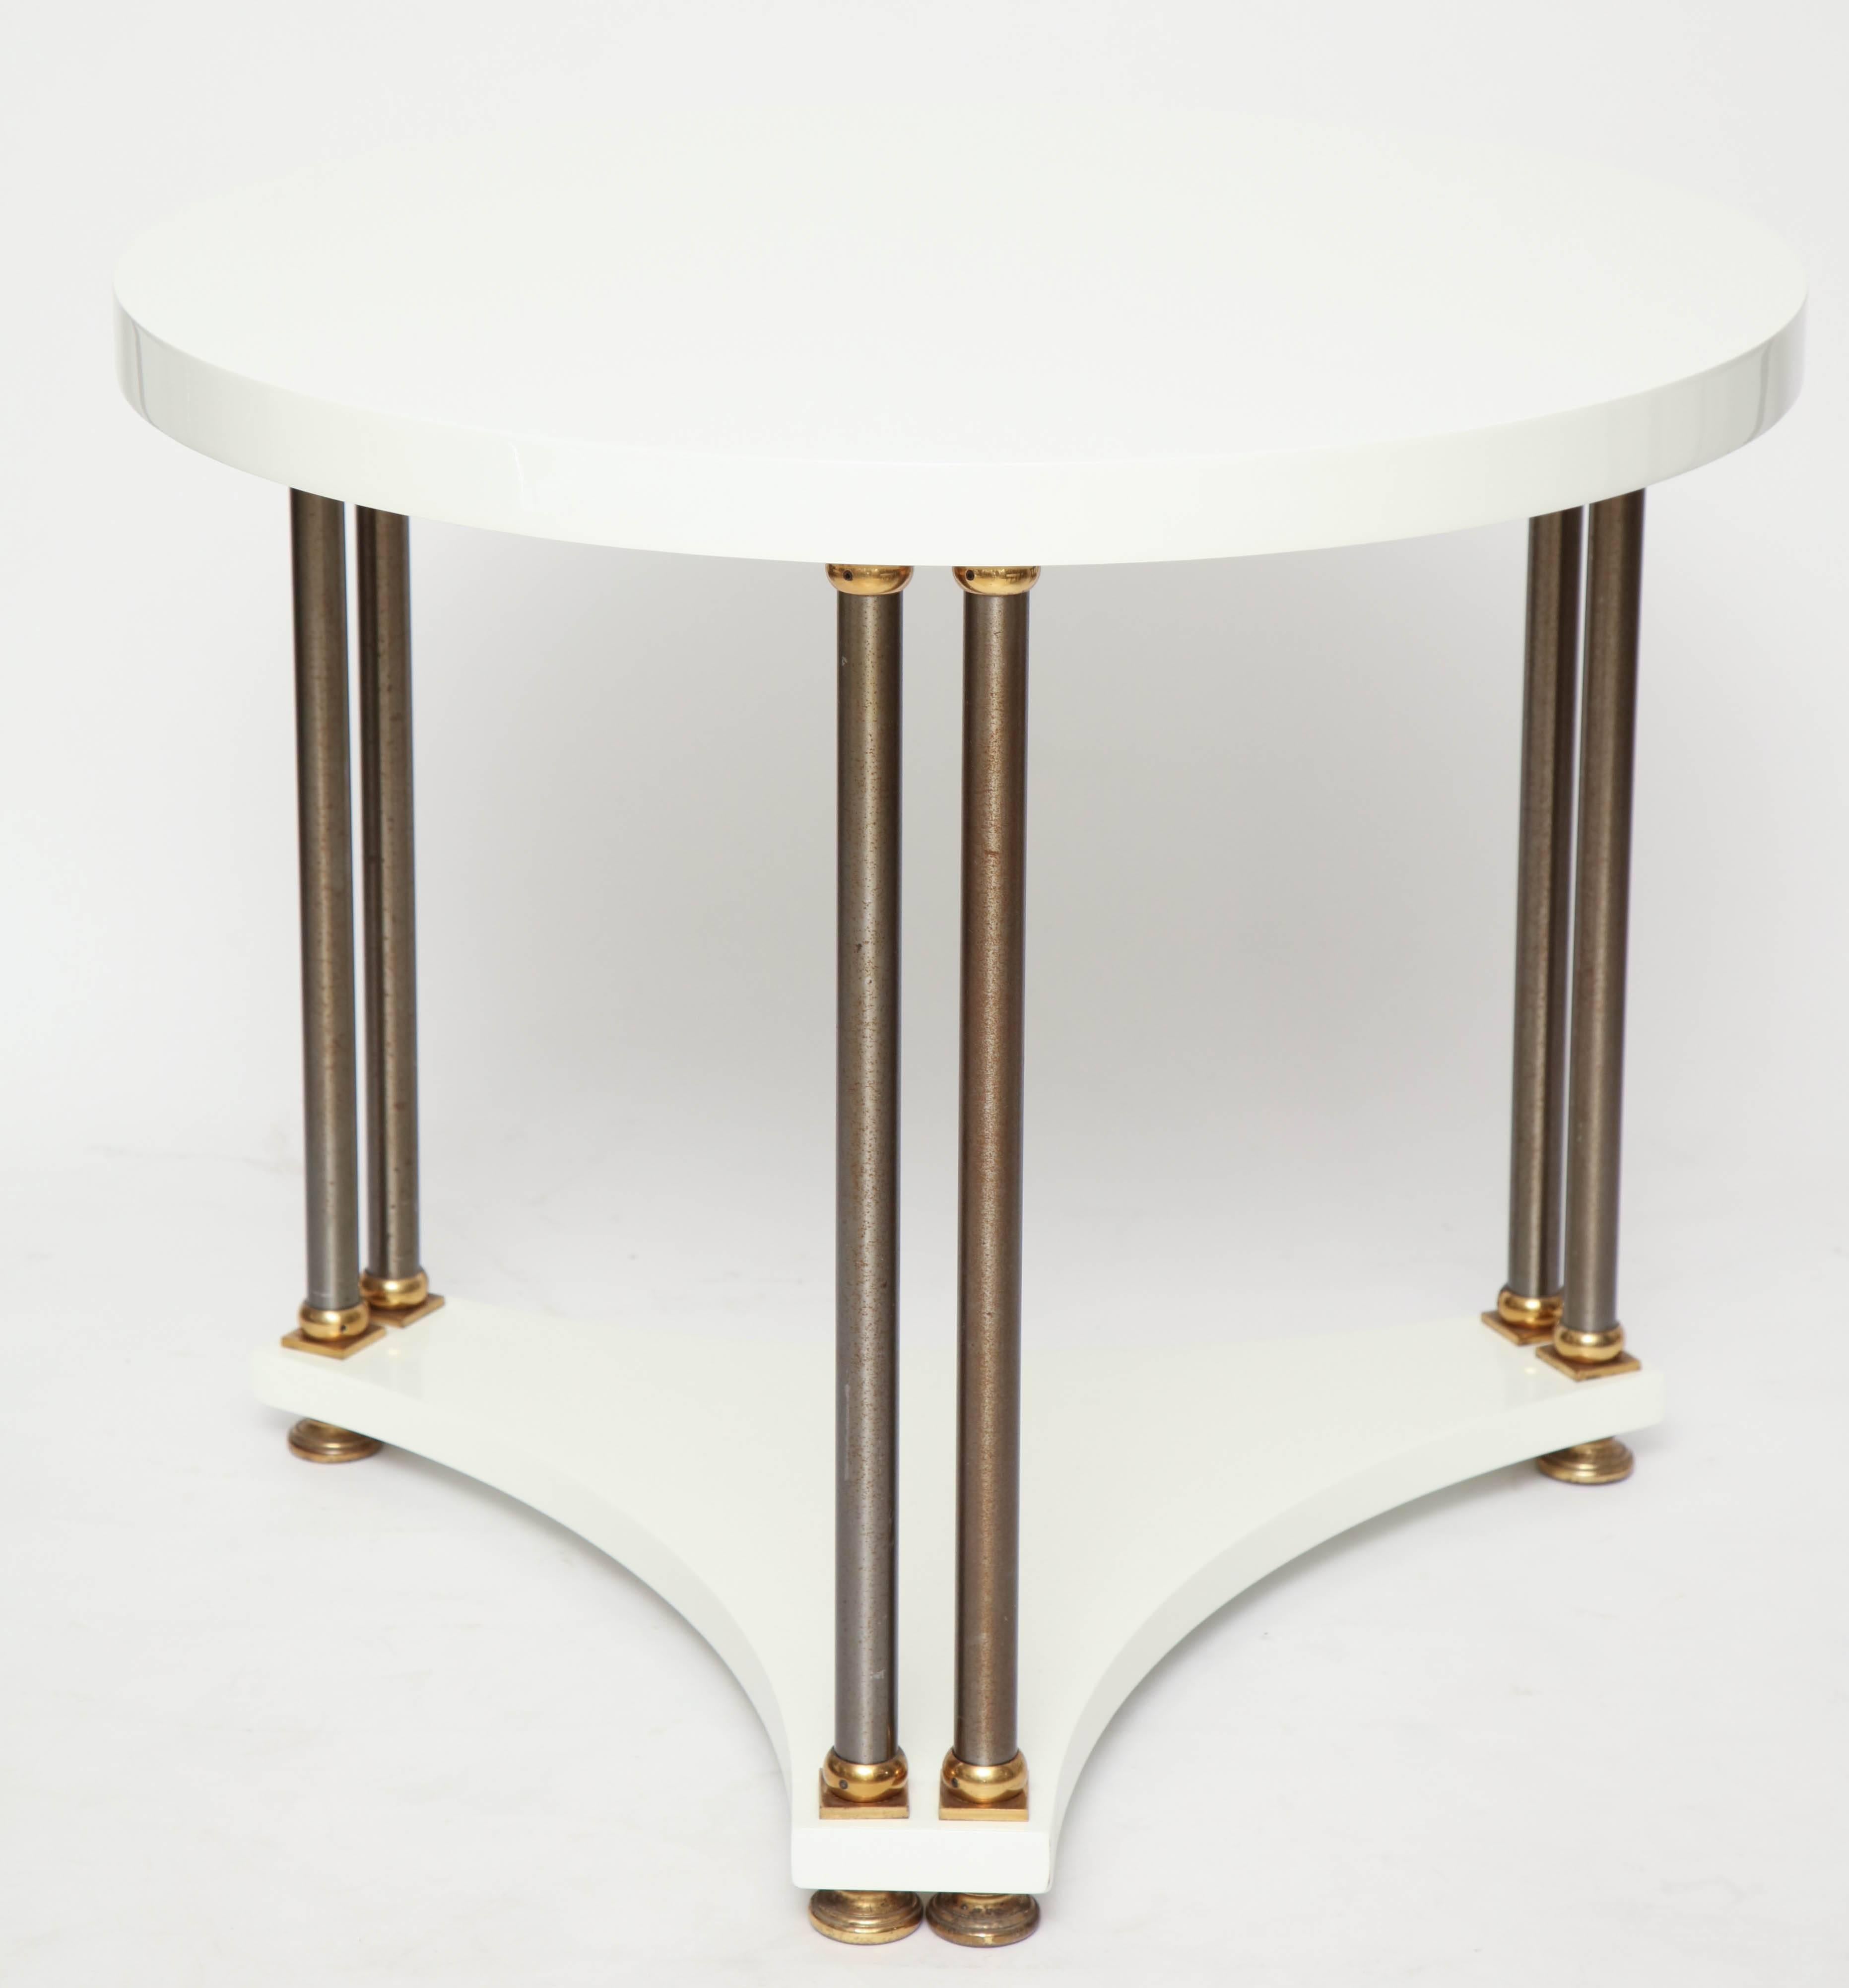 Round white lacquer table with brass legs, in the spirit of Maison Jansen.